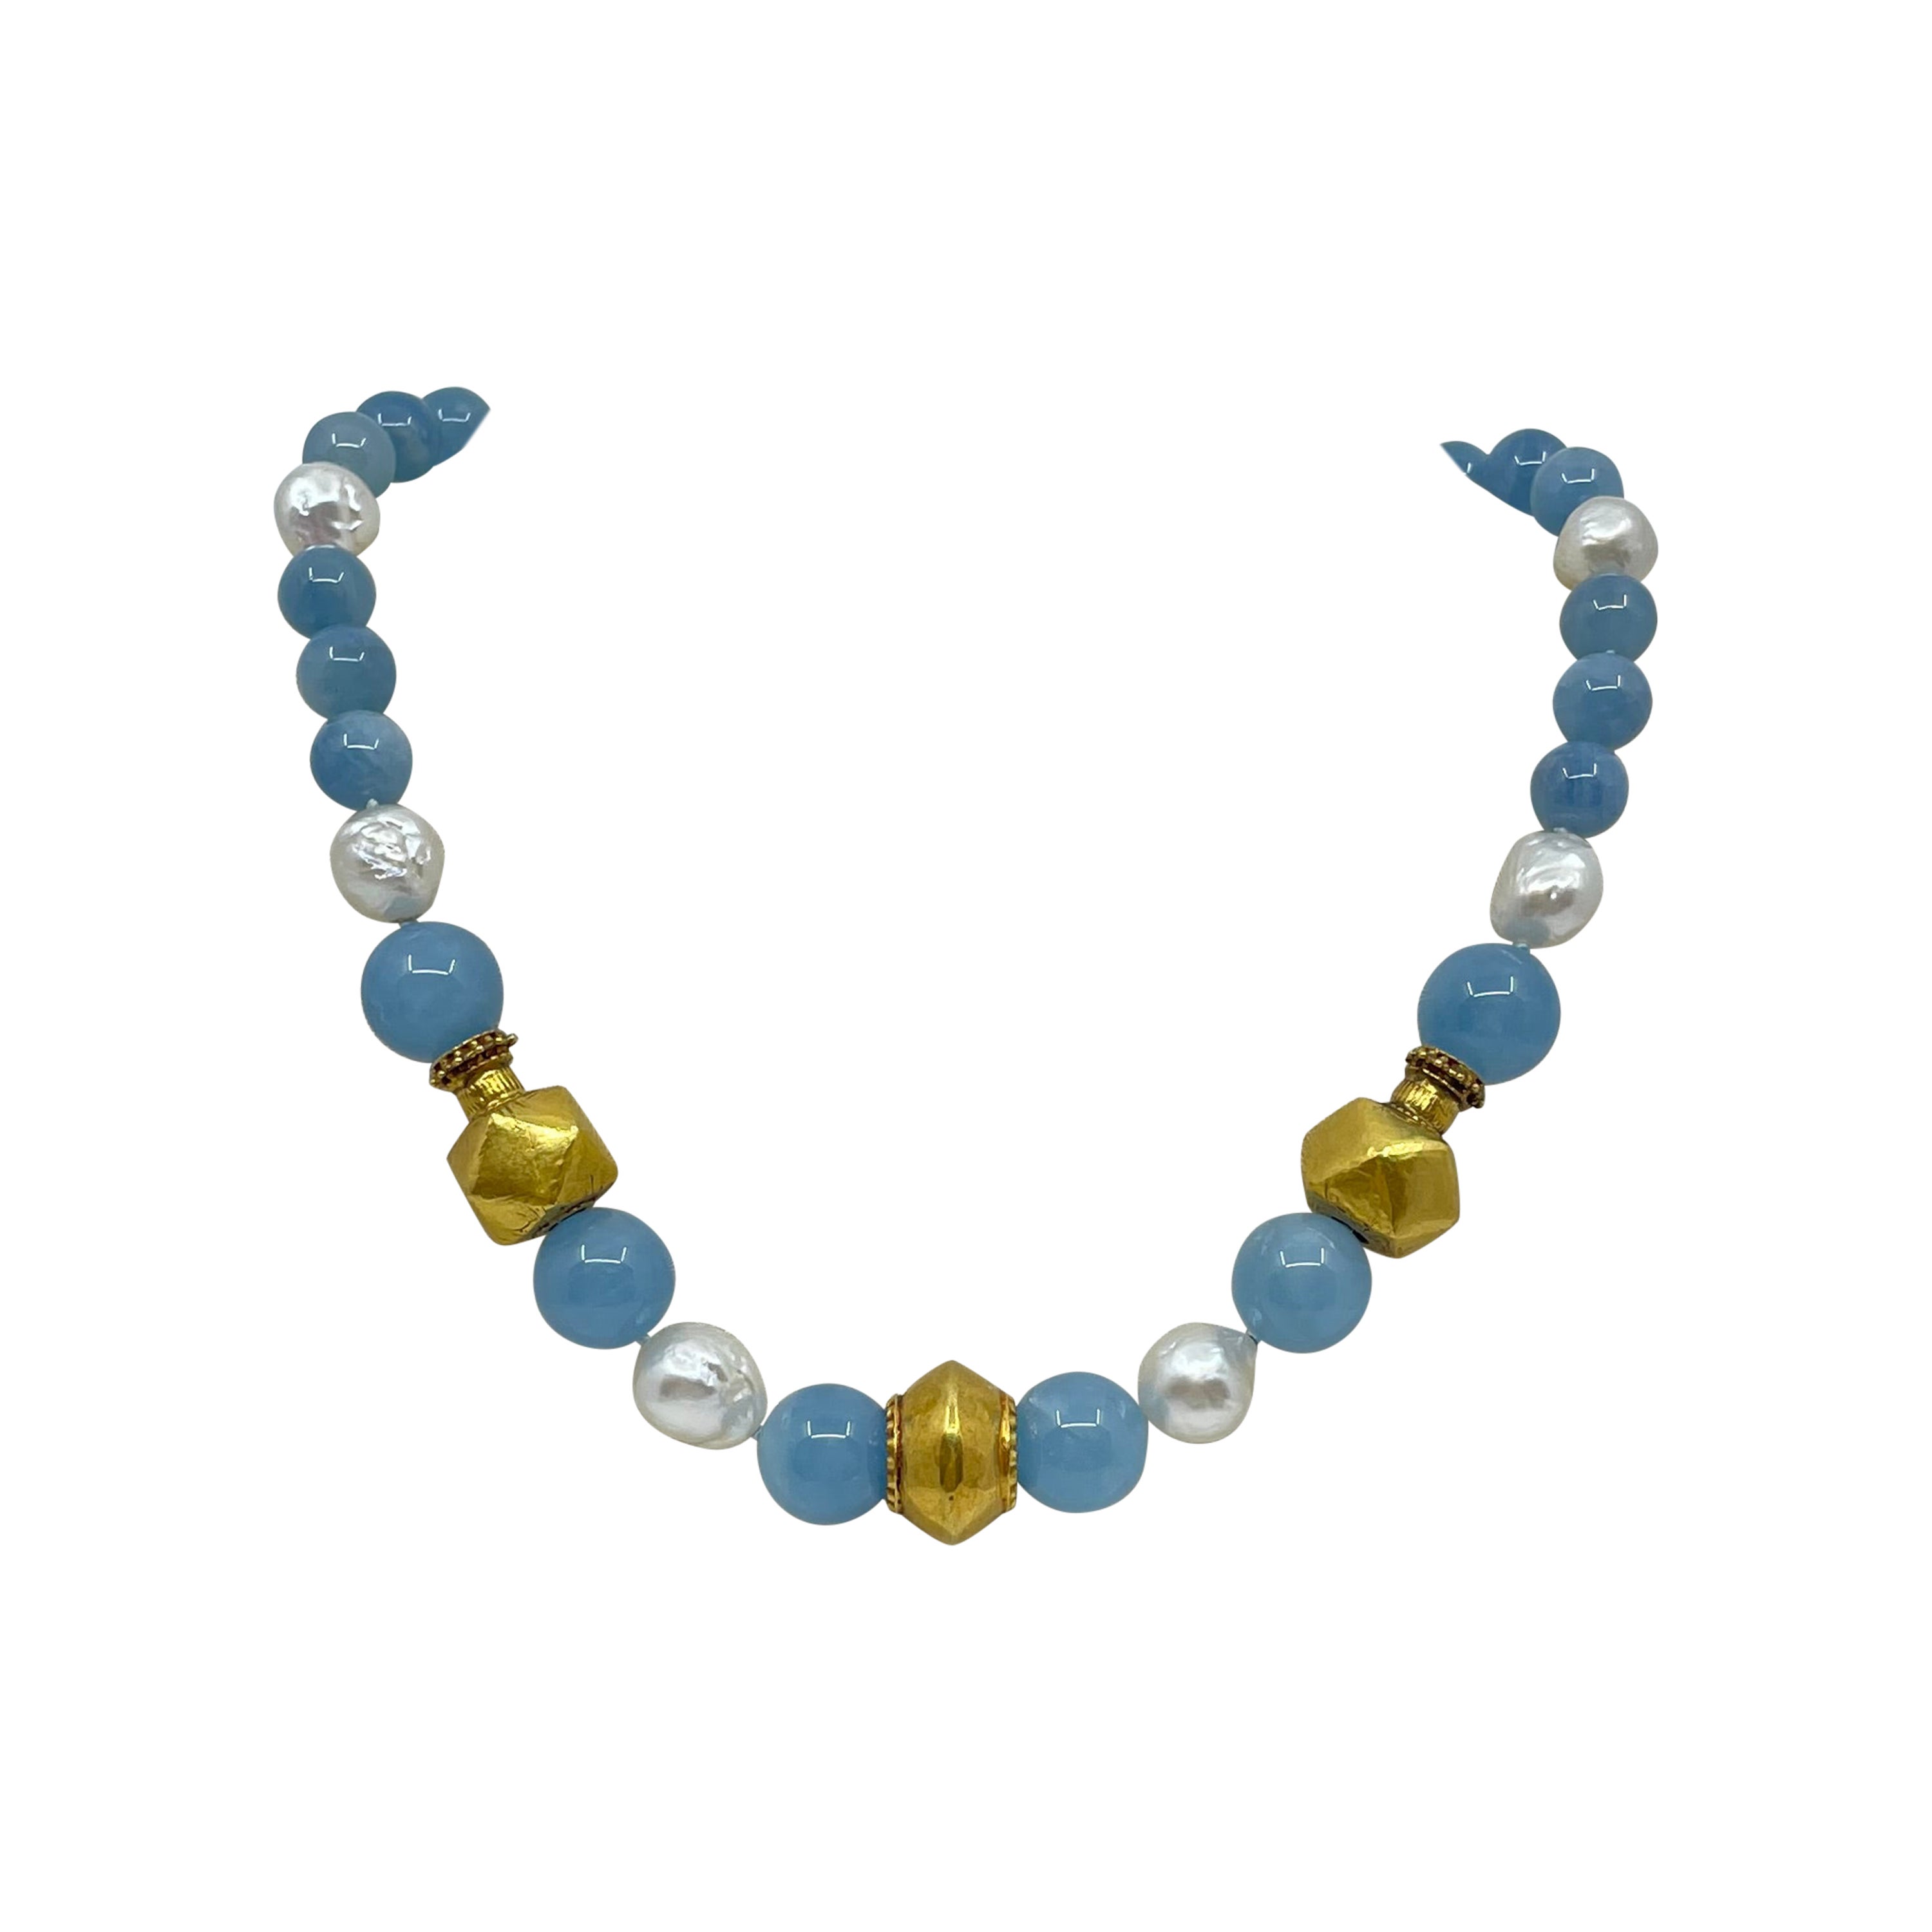 Necklace with Aquamarine, South Sea Pearls, Gold & 18K Solid Gold Beads For Sale